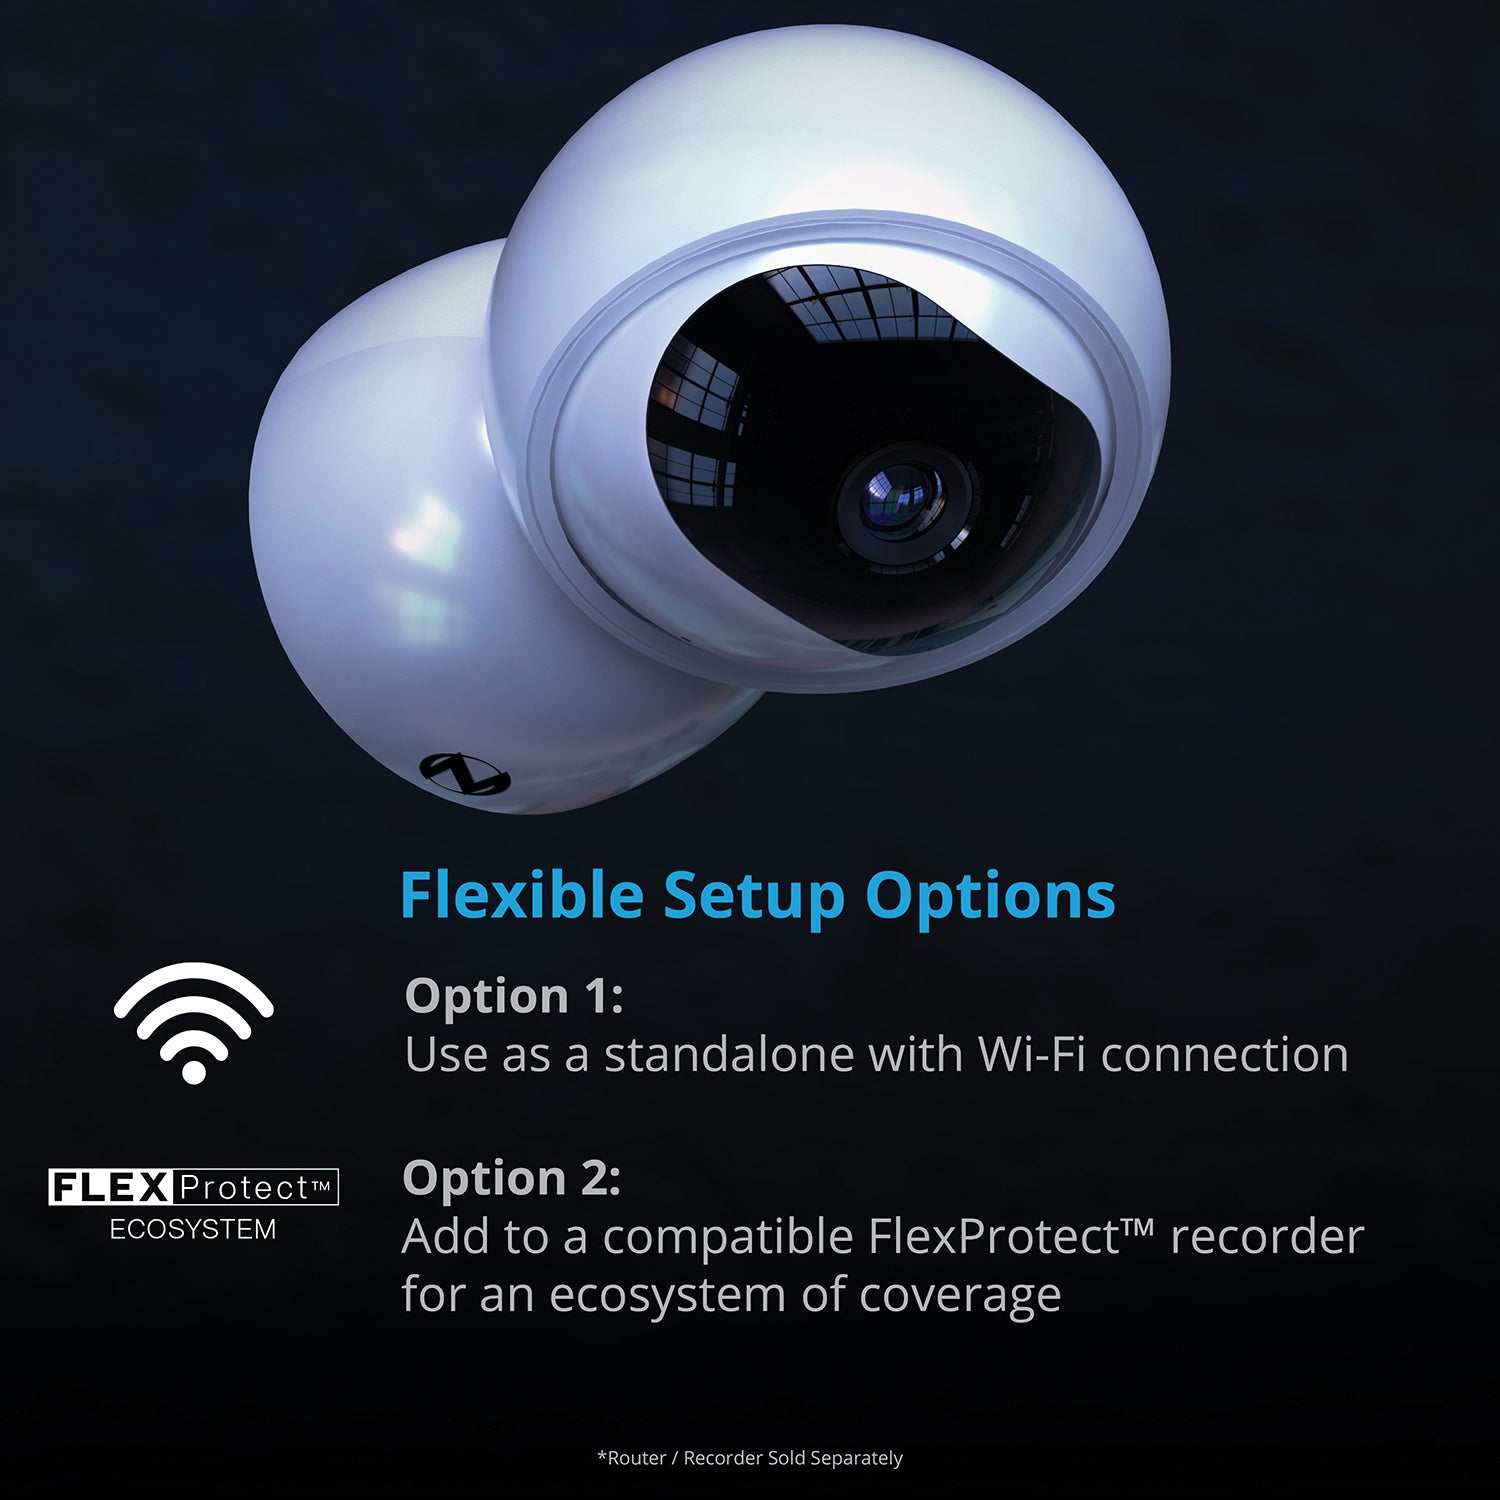 Night Owl - Indoor Wi-Fi IP Plug in 3MP Deterrence Camera with Pan, Tilt and 2-Way Audio - White